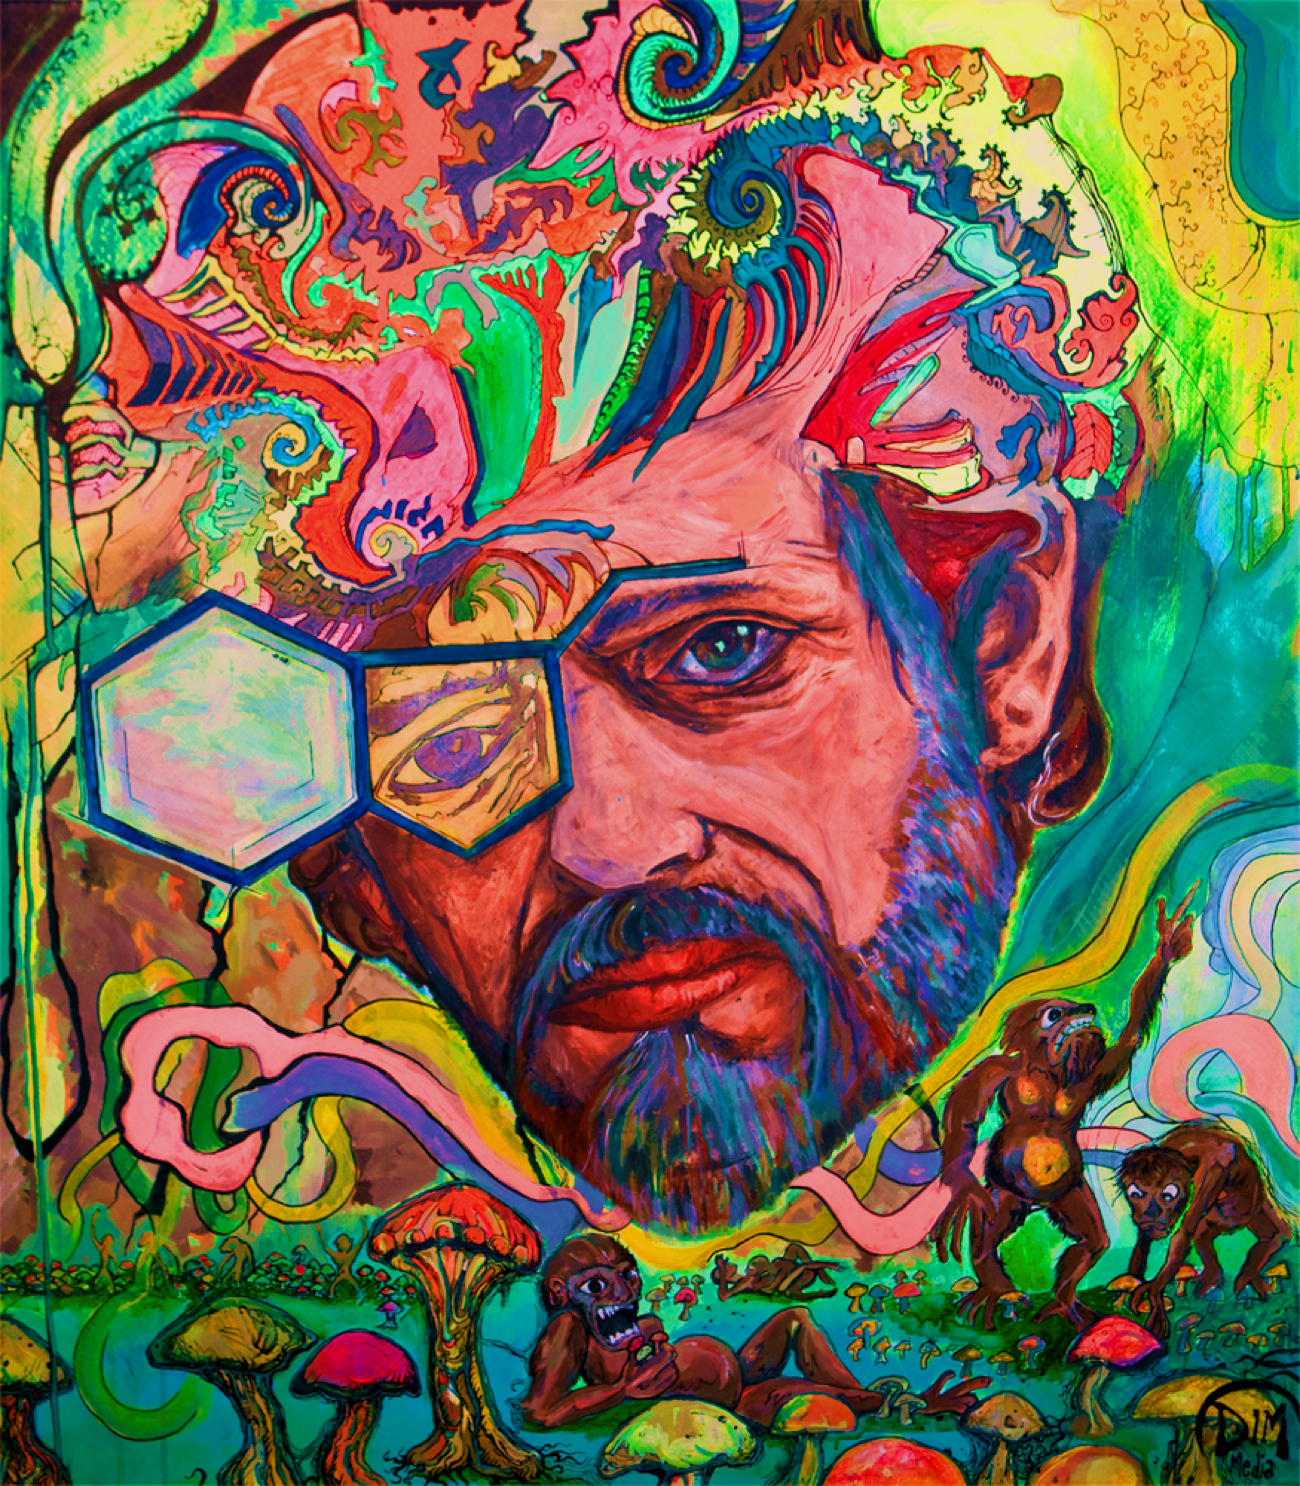 Terence McKenna, The Amazing Life of Terence McKenna